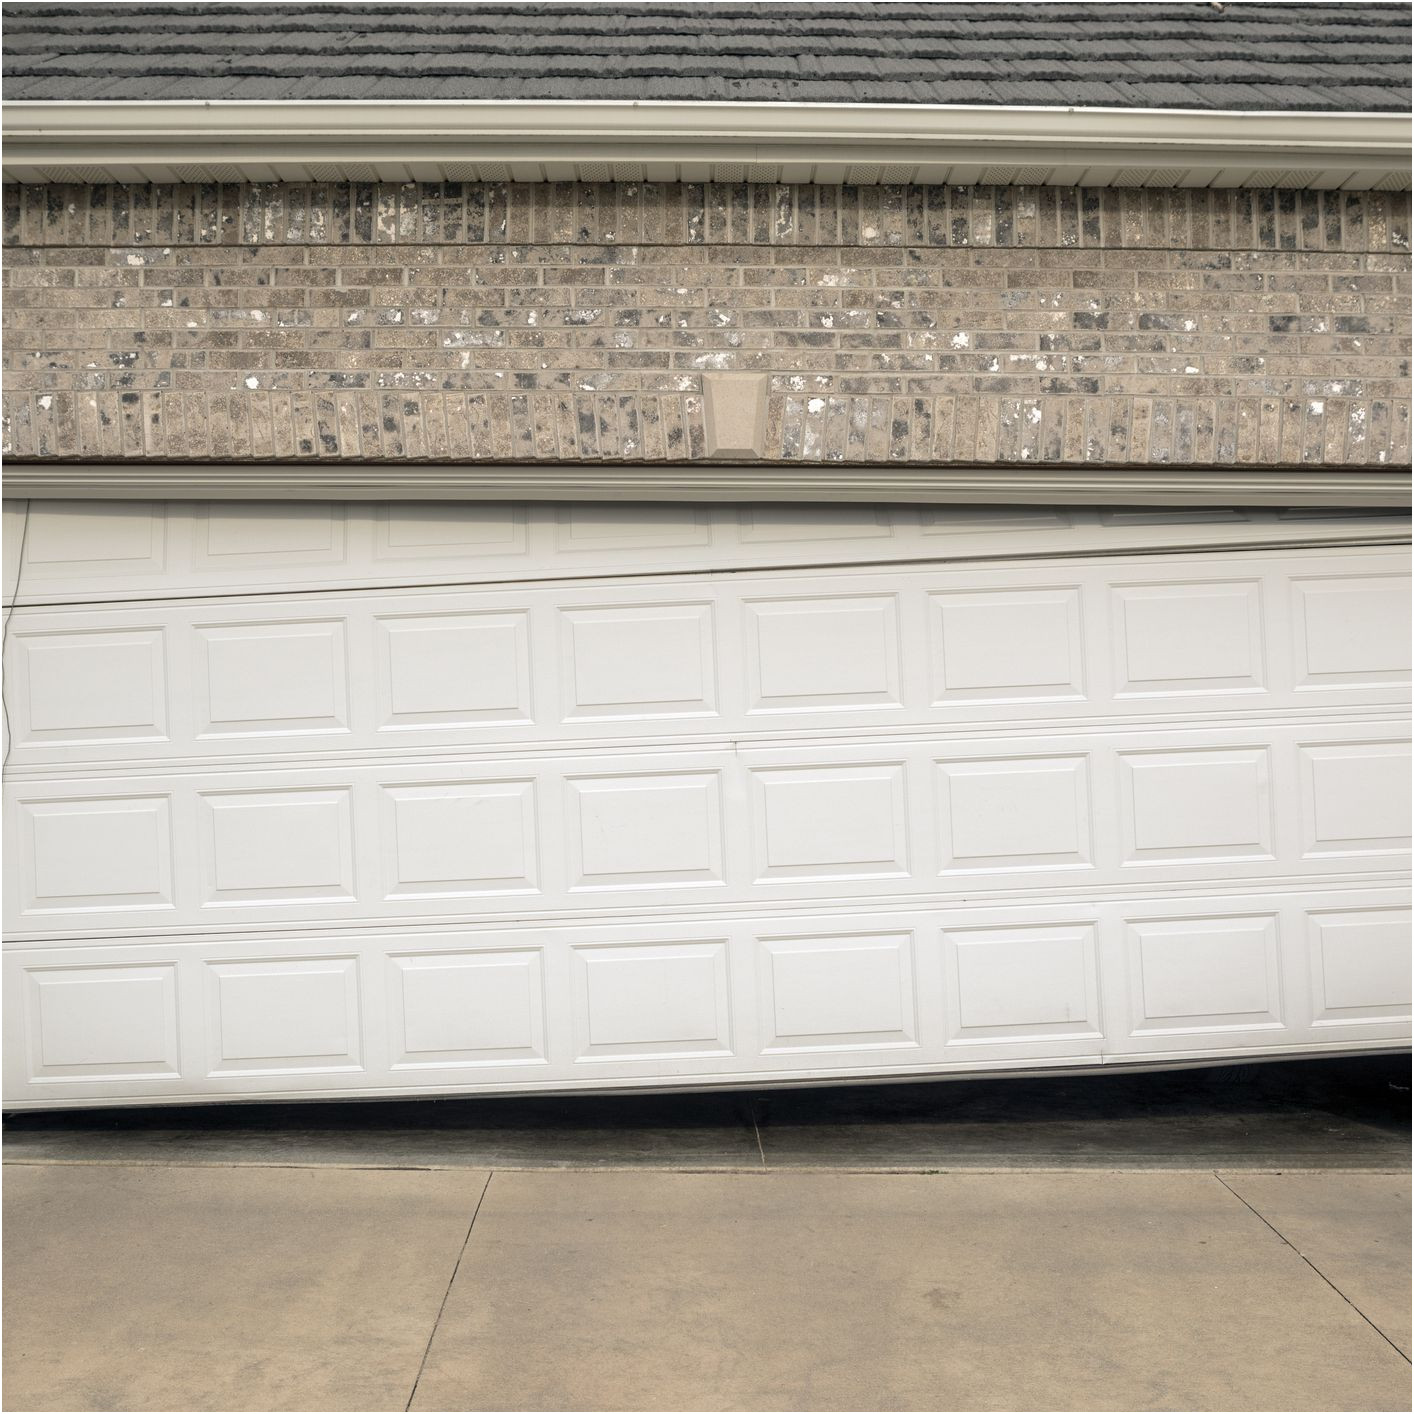 New Garage Door Shifted to One Side